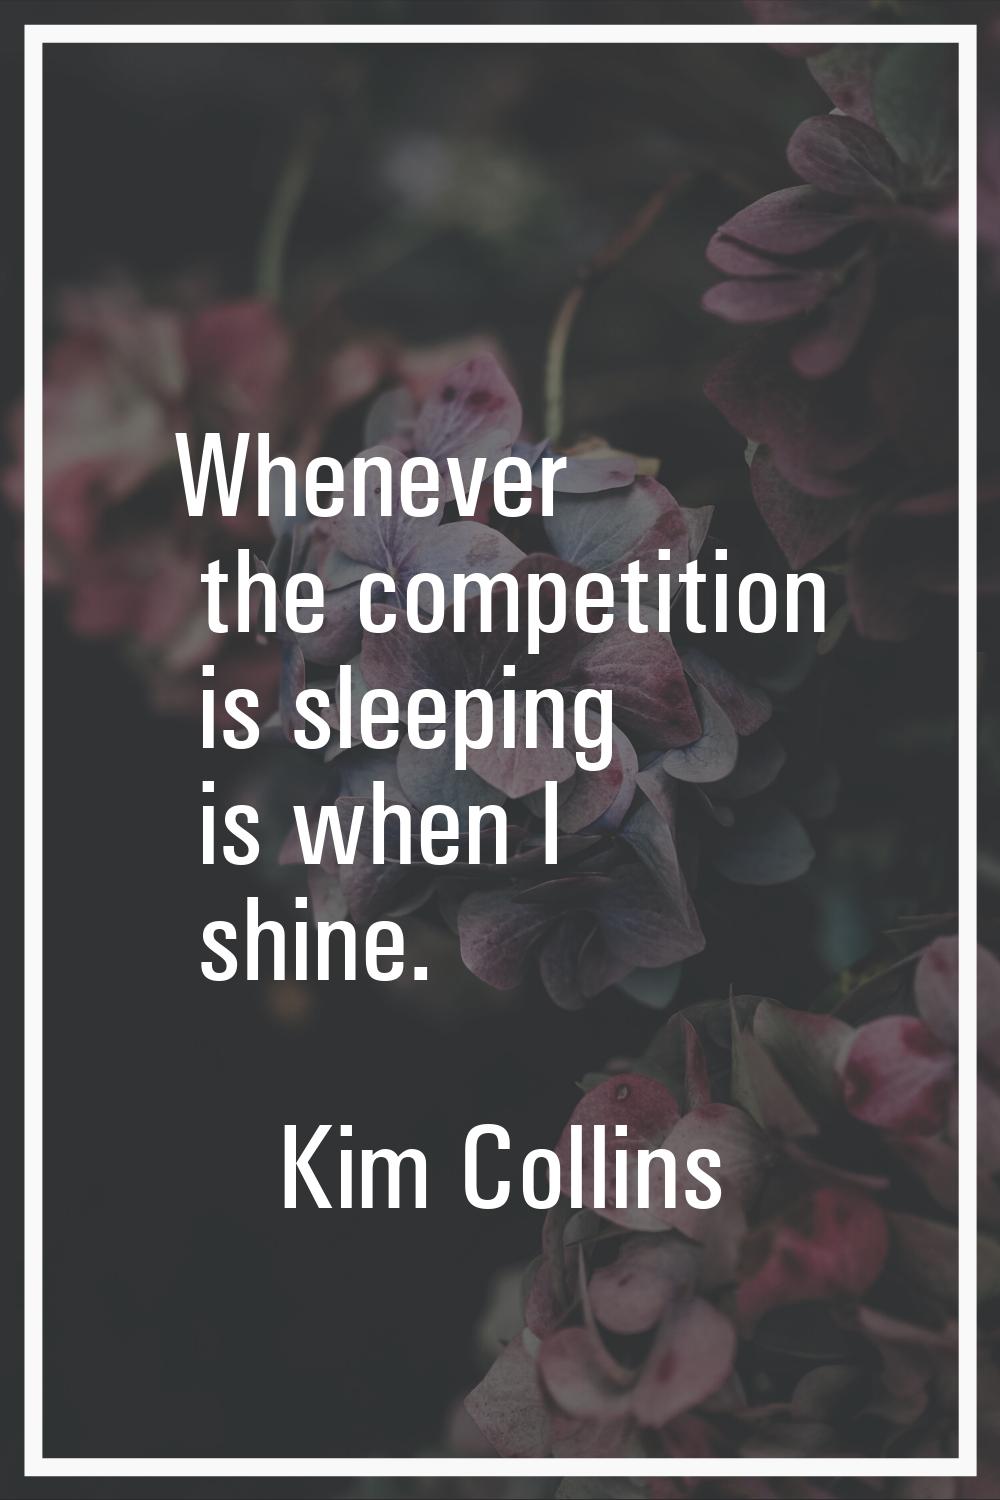 Whenever the competition is sleeping is when I shine.